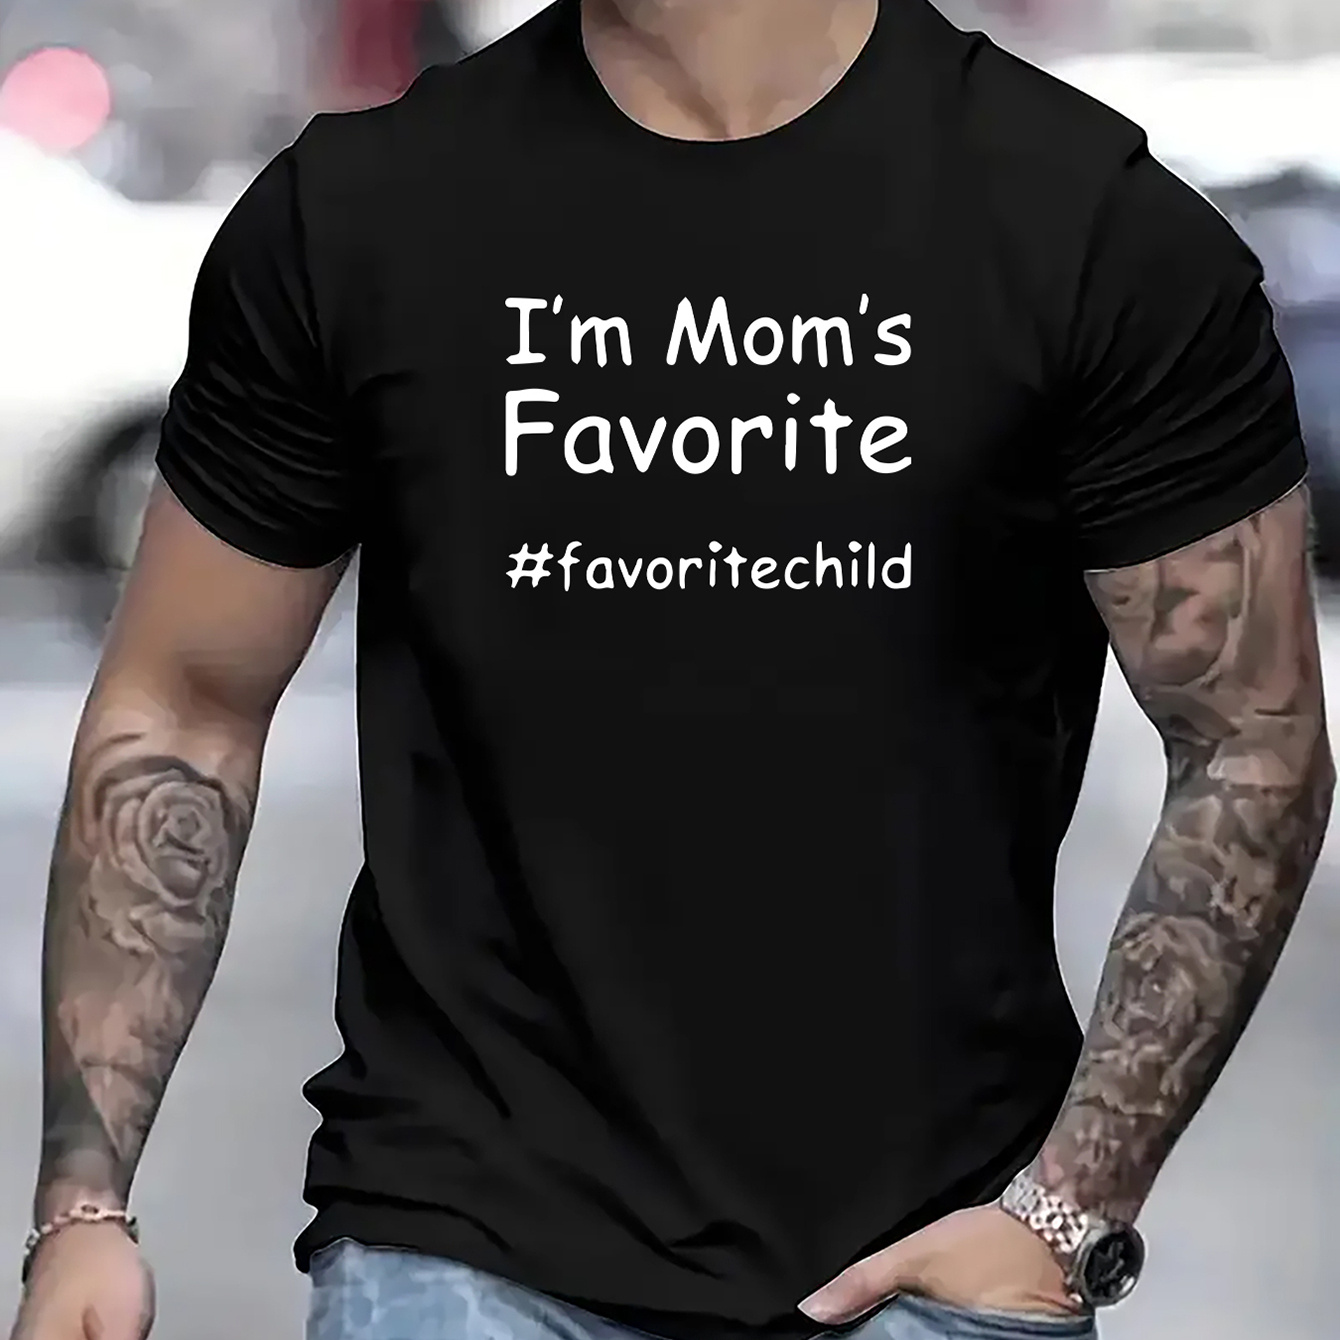 

I'm Mom's Favorite Child Letters Print Casual Crew Neck Short Sleeves For Men, Quick-drying Comfy Casual Summer T-shirt For Daily Wear Work Out And Vacation Resorts